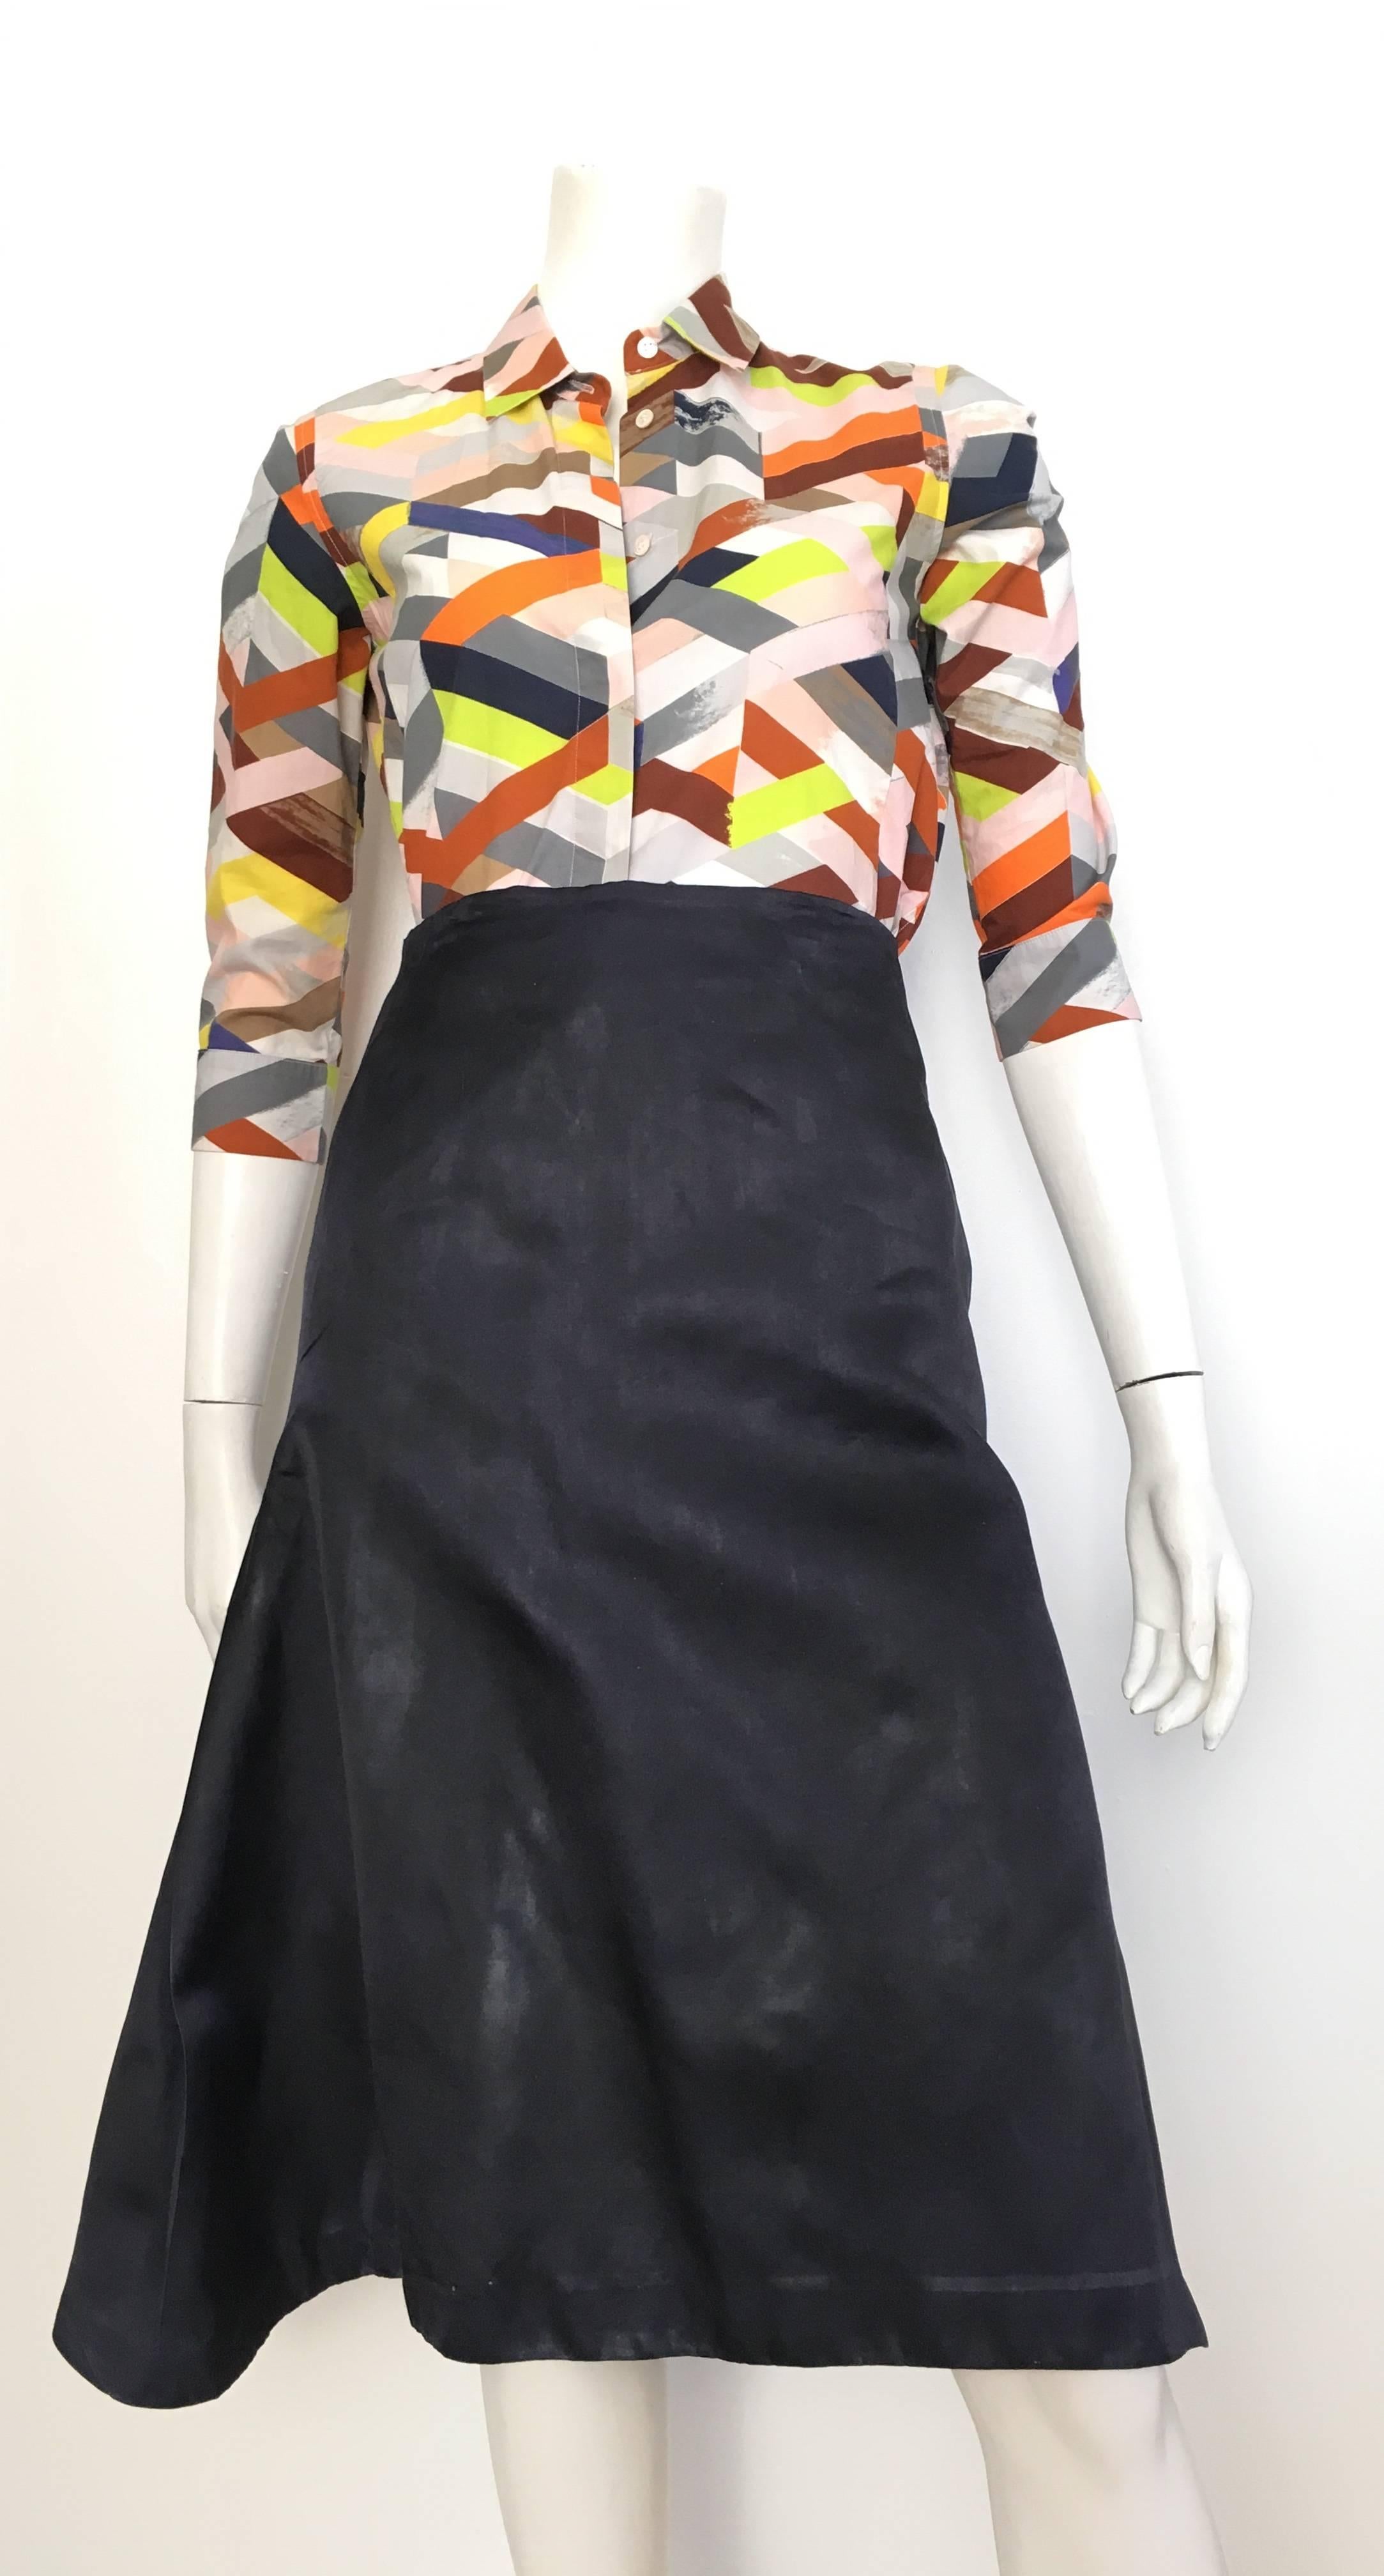 Alexander McQueen 2007 cotton / silk navy skirt is an Italian size 44 and fits like an USA size 6. Ladies please grab your tape measure so you can measure your waist & hips to make certain this gorgeous skirt will fit your lovely body.  Zipper